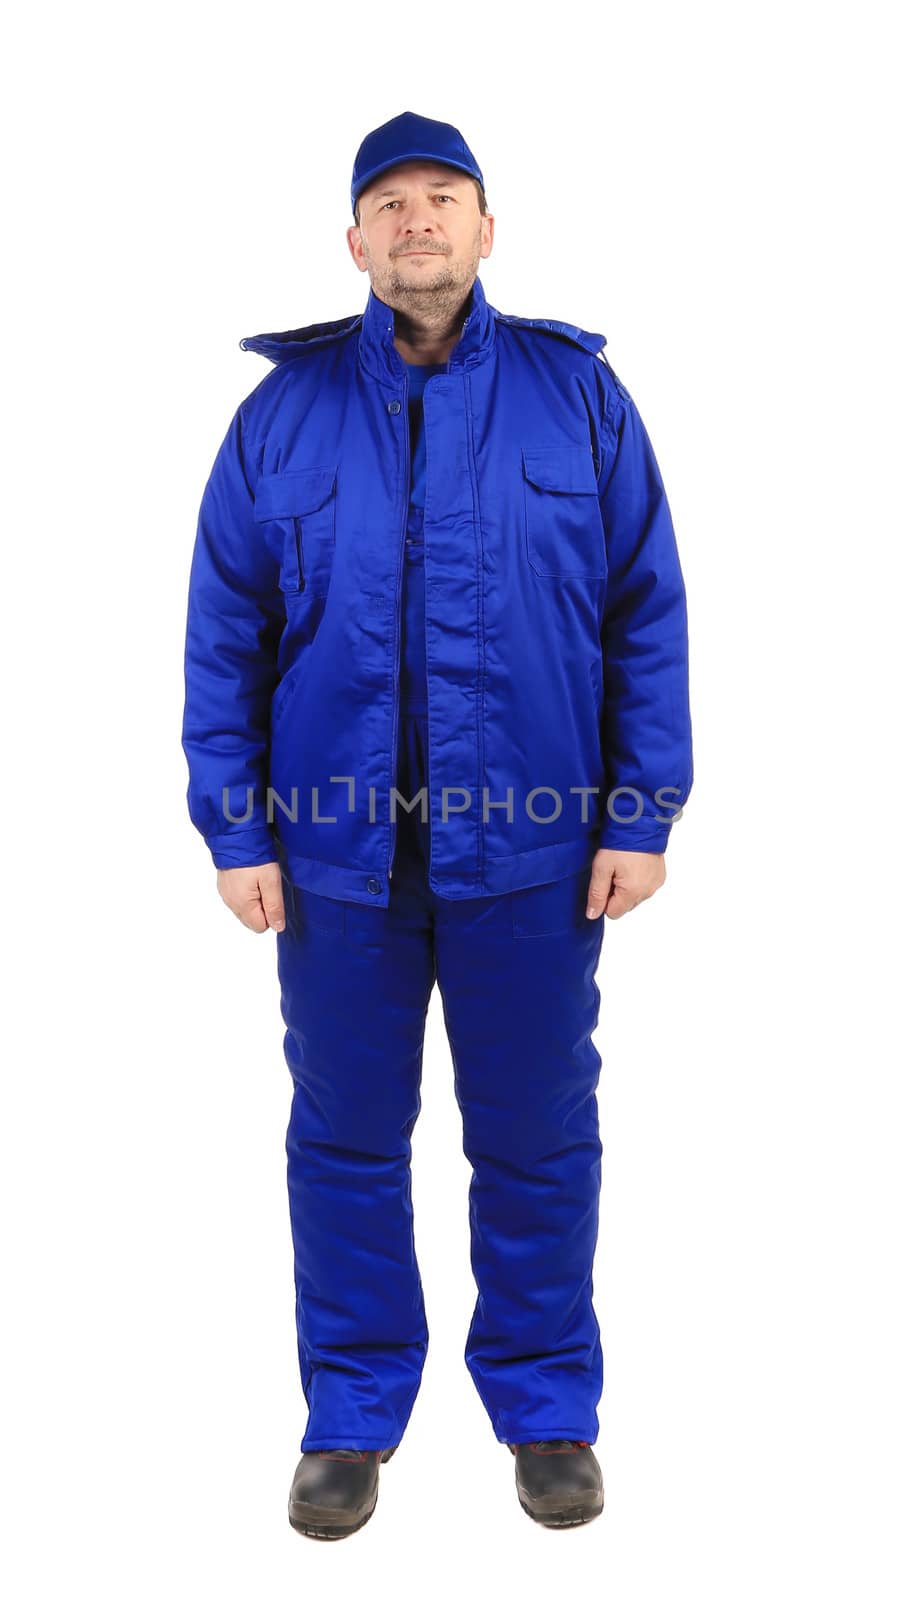 Worker in winter vest and pants. Isolated on a white background.